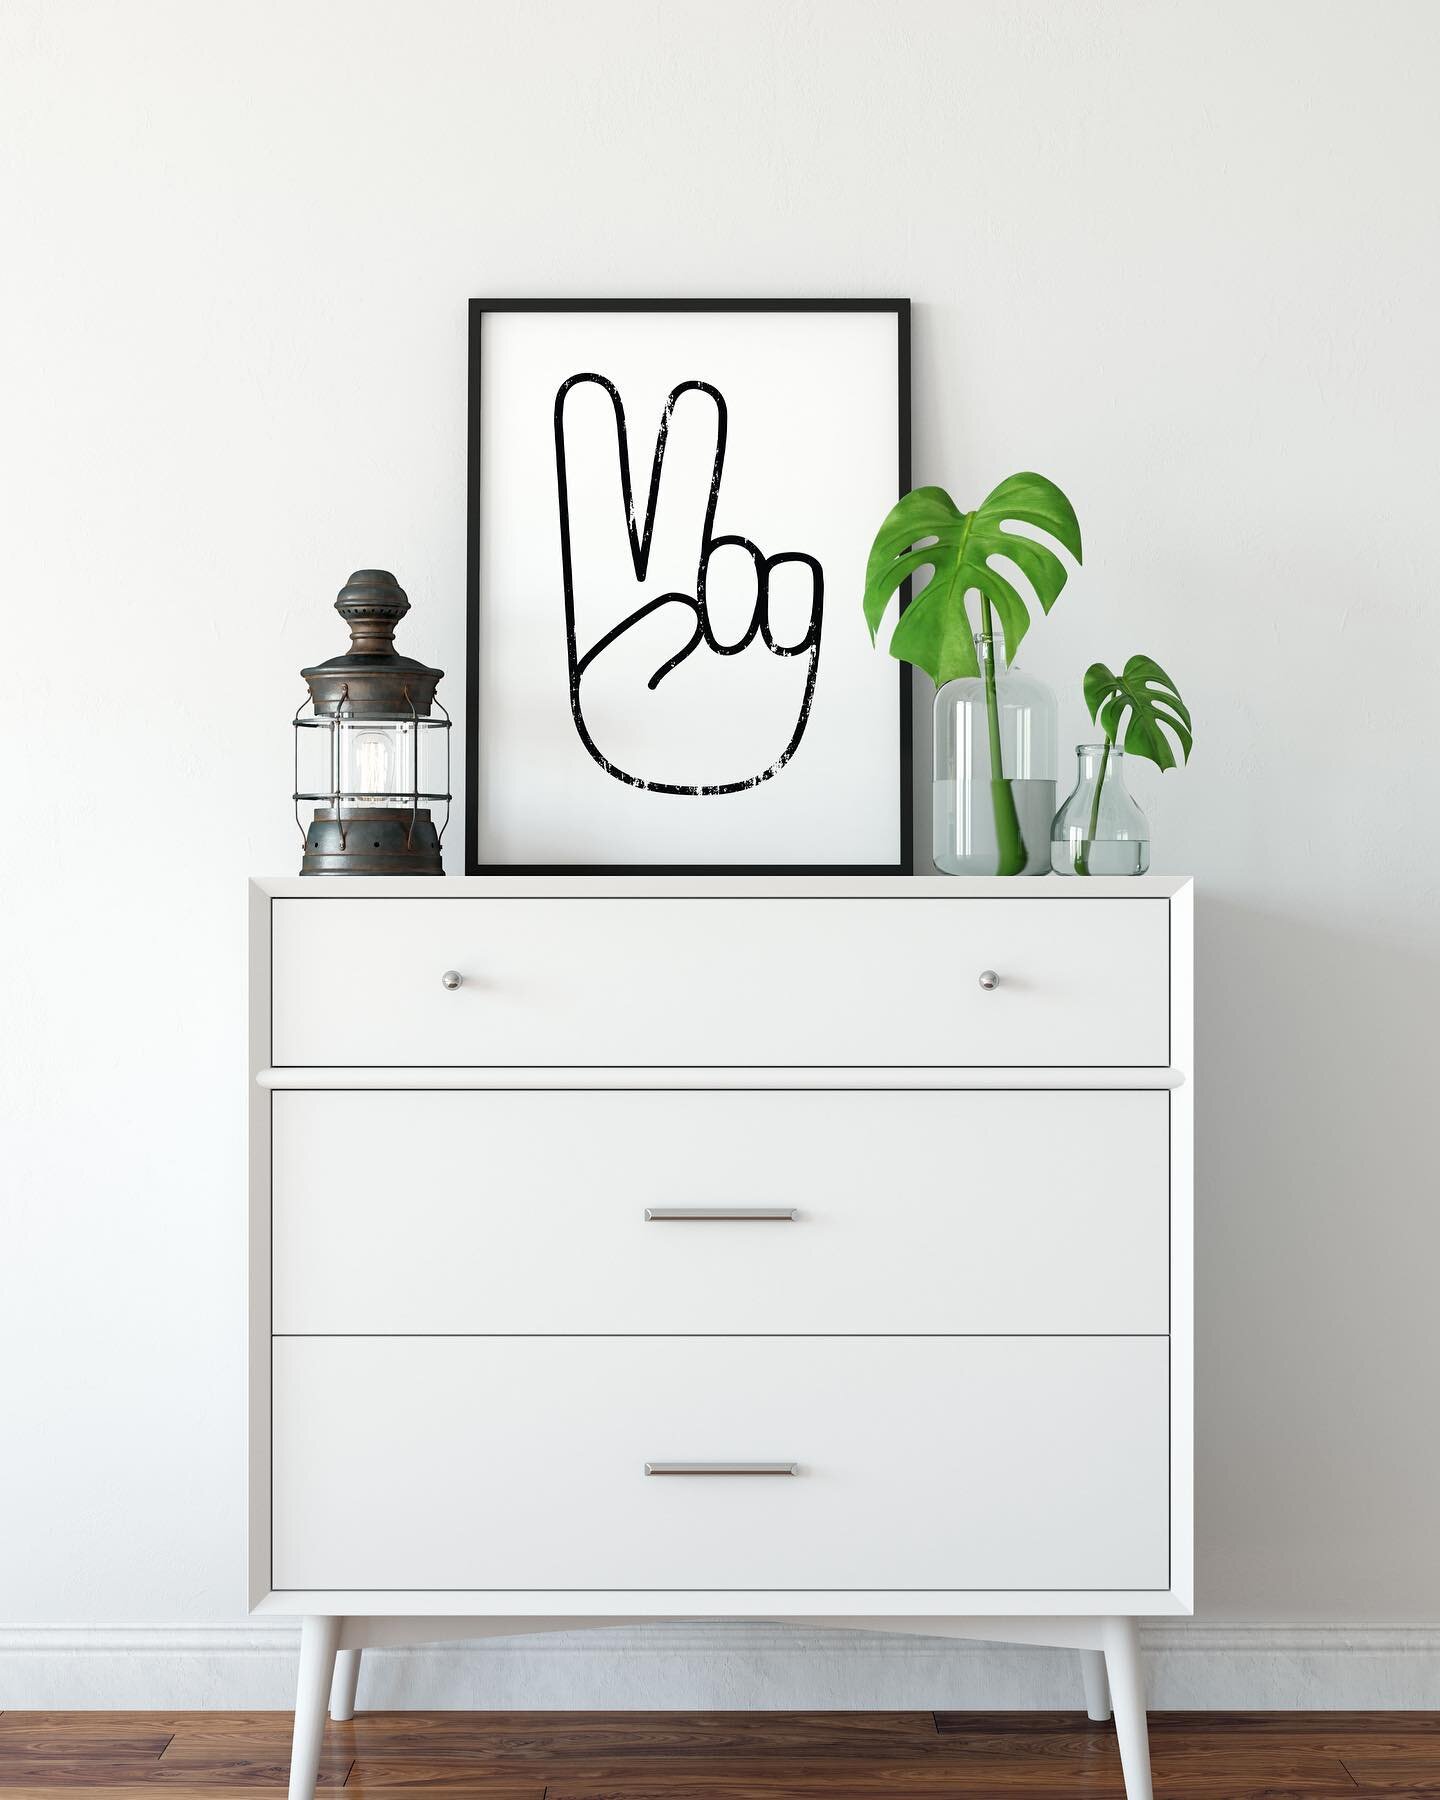 We&rsquo;re all about the good vibes ✌️.

Shop our minimalist black and white collection of art prints today.